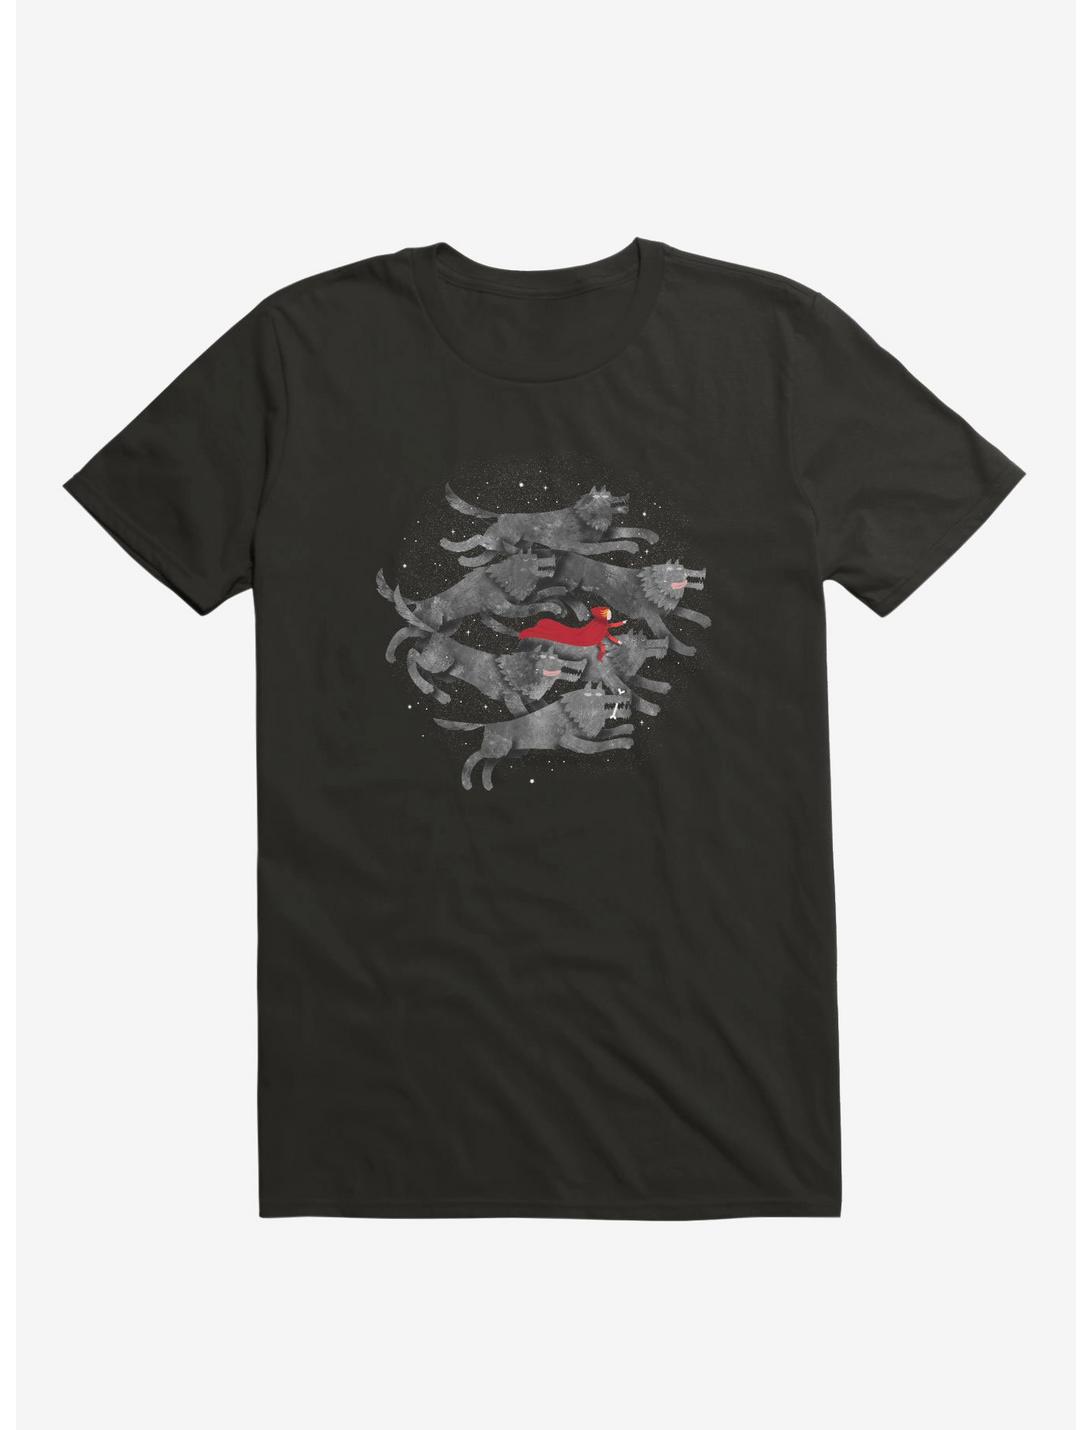 Run with the Pack T-Shirt, BLACK, hi-res